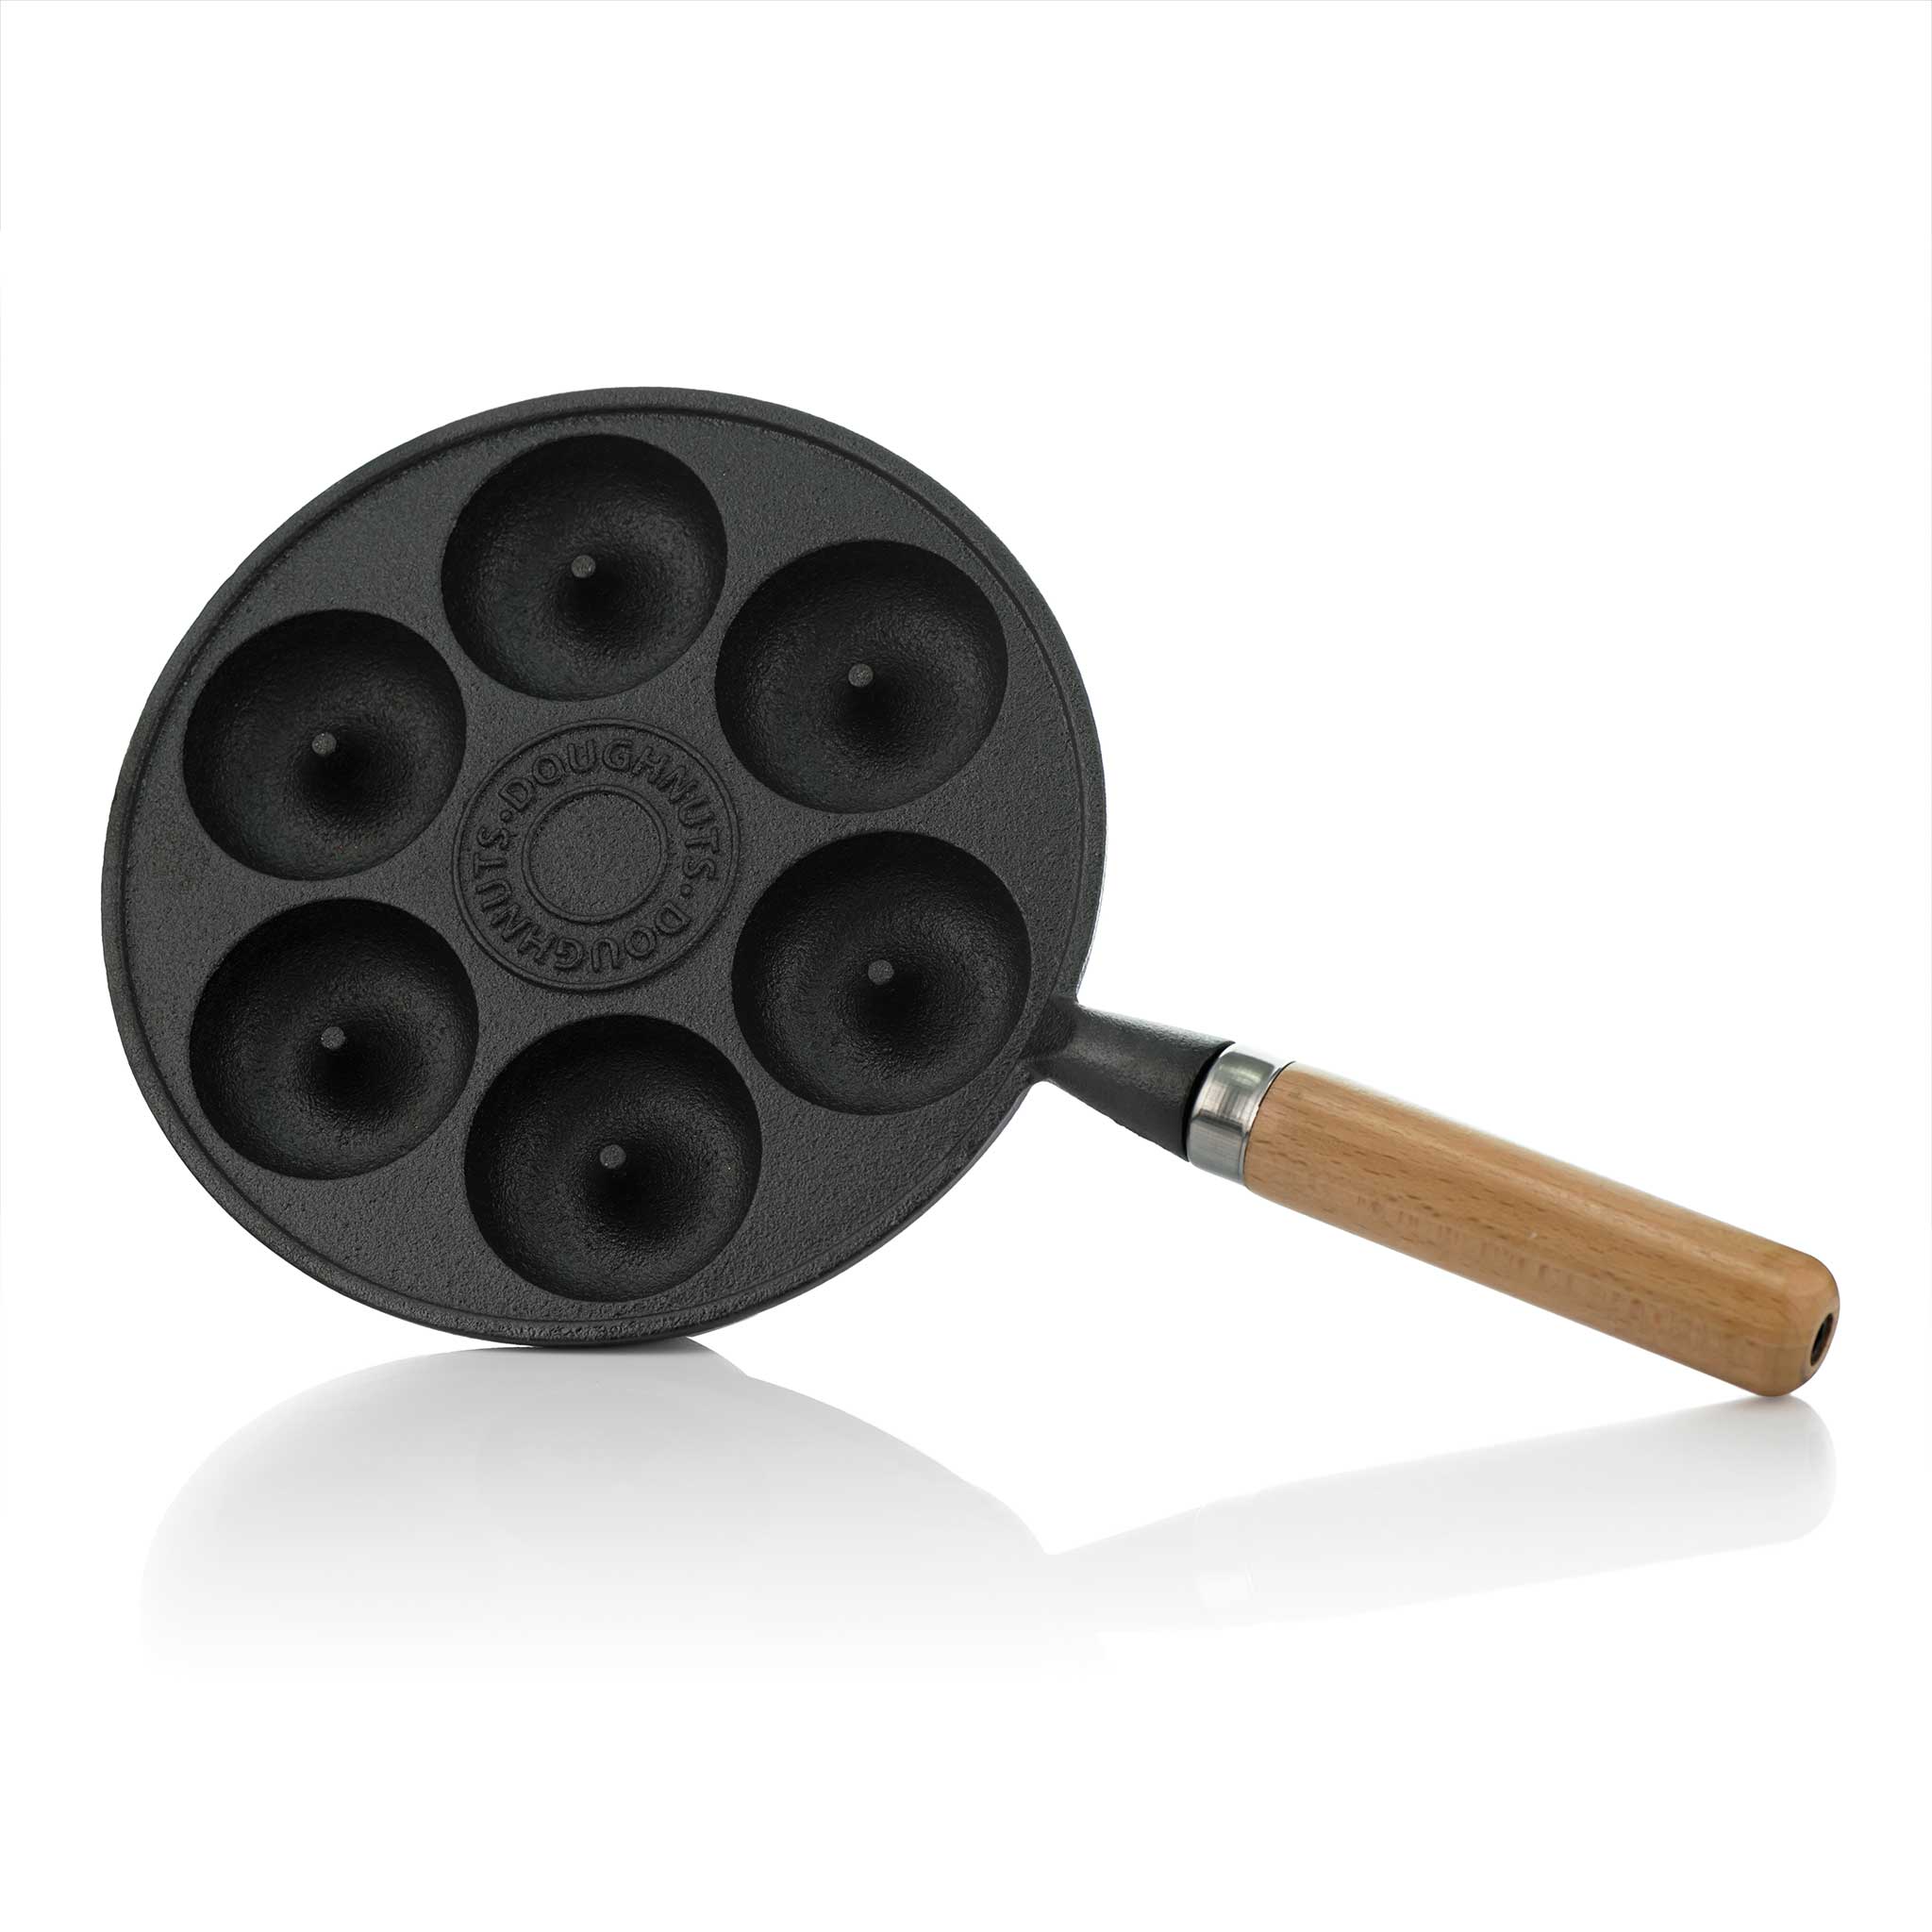 Real cast iron mini donut pan with wooden handle